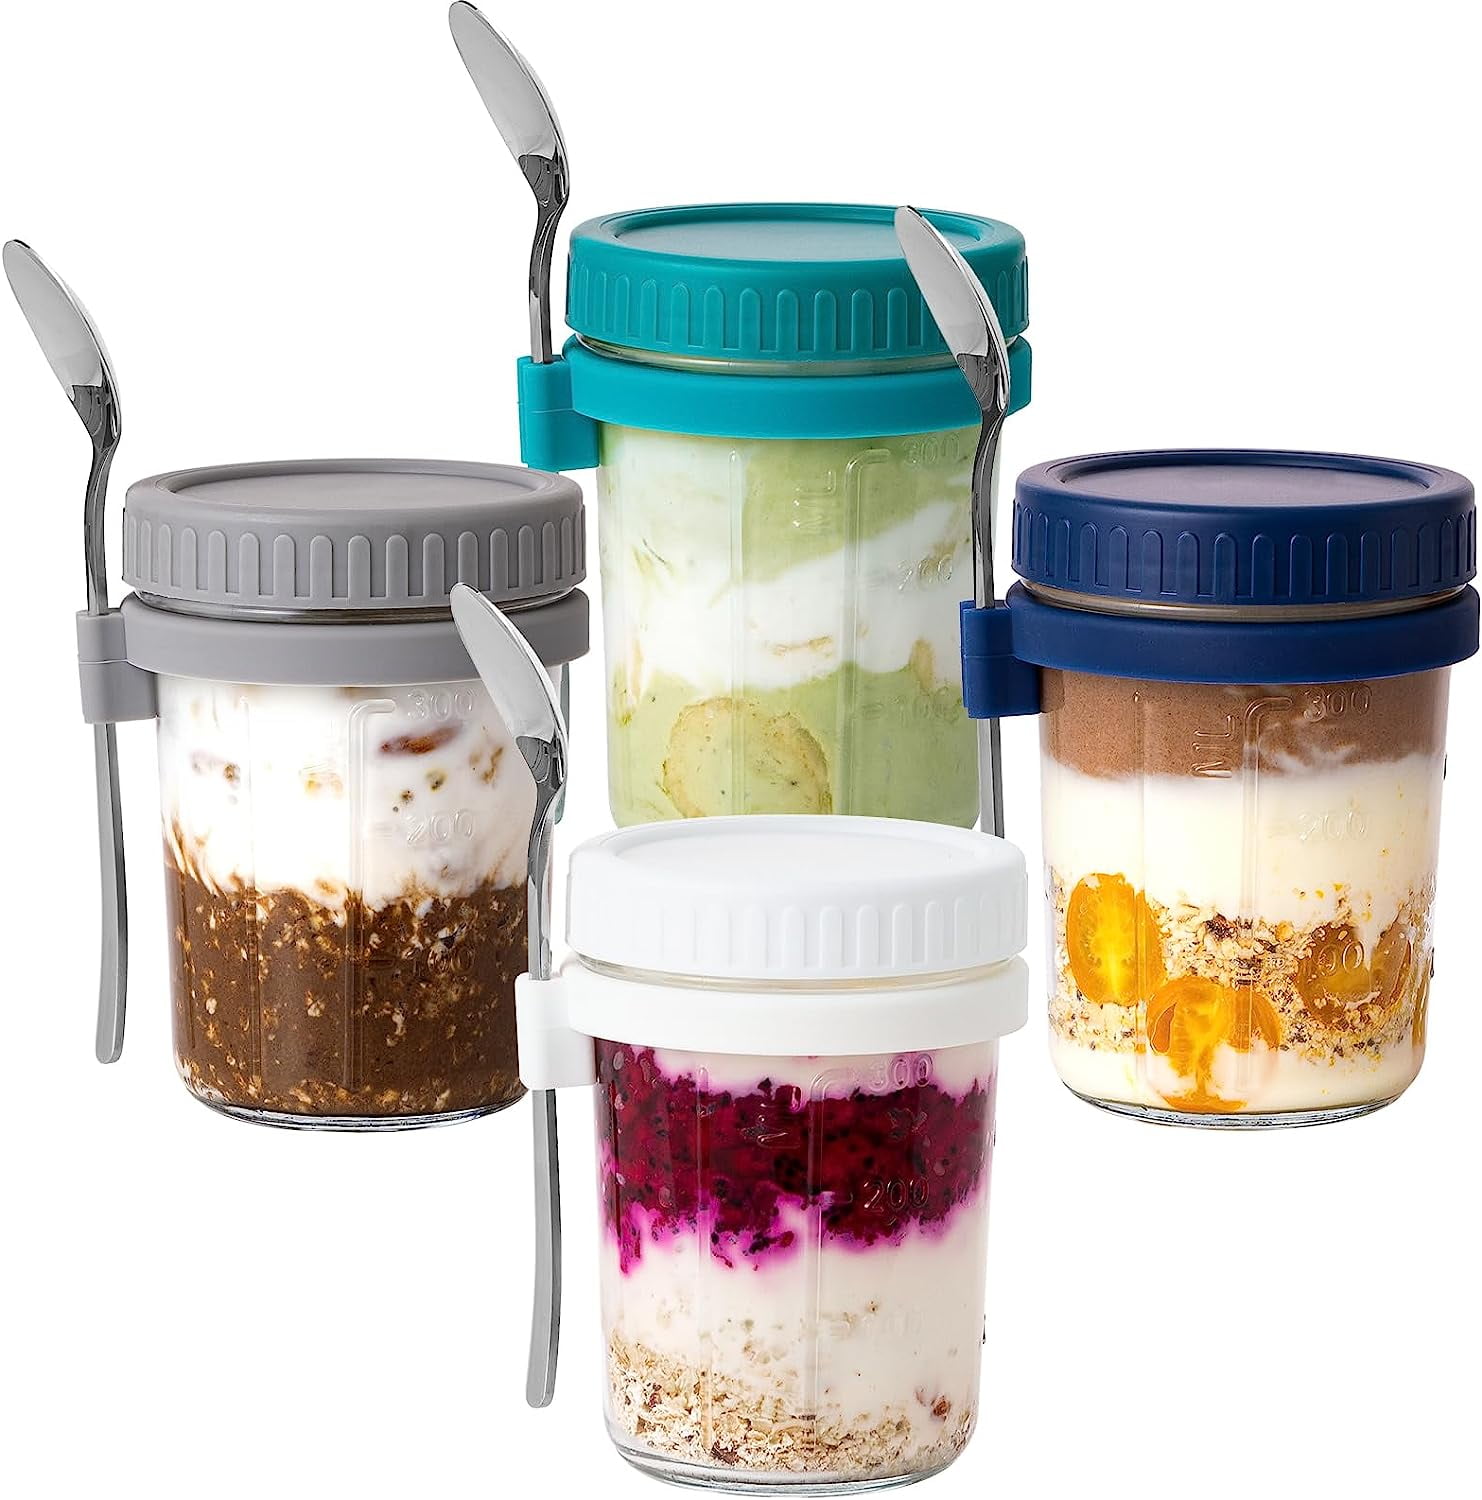 MHDCLY Overnight Oats Containers with Lids,16oz Overnight Oats Jars,4Pack Oatmeal Cups,Meal Prep Containers,Glass Meal Prep Containers with Lids